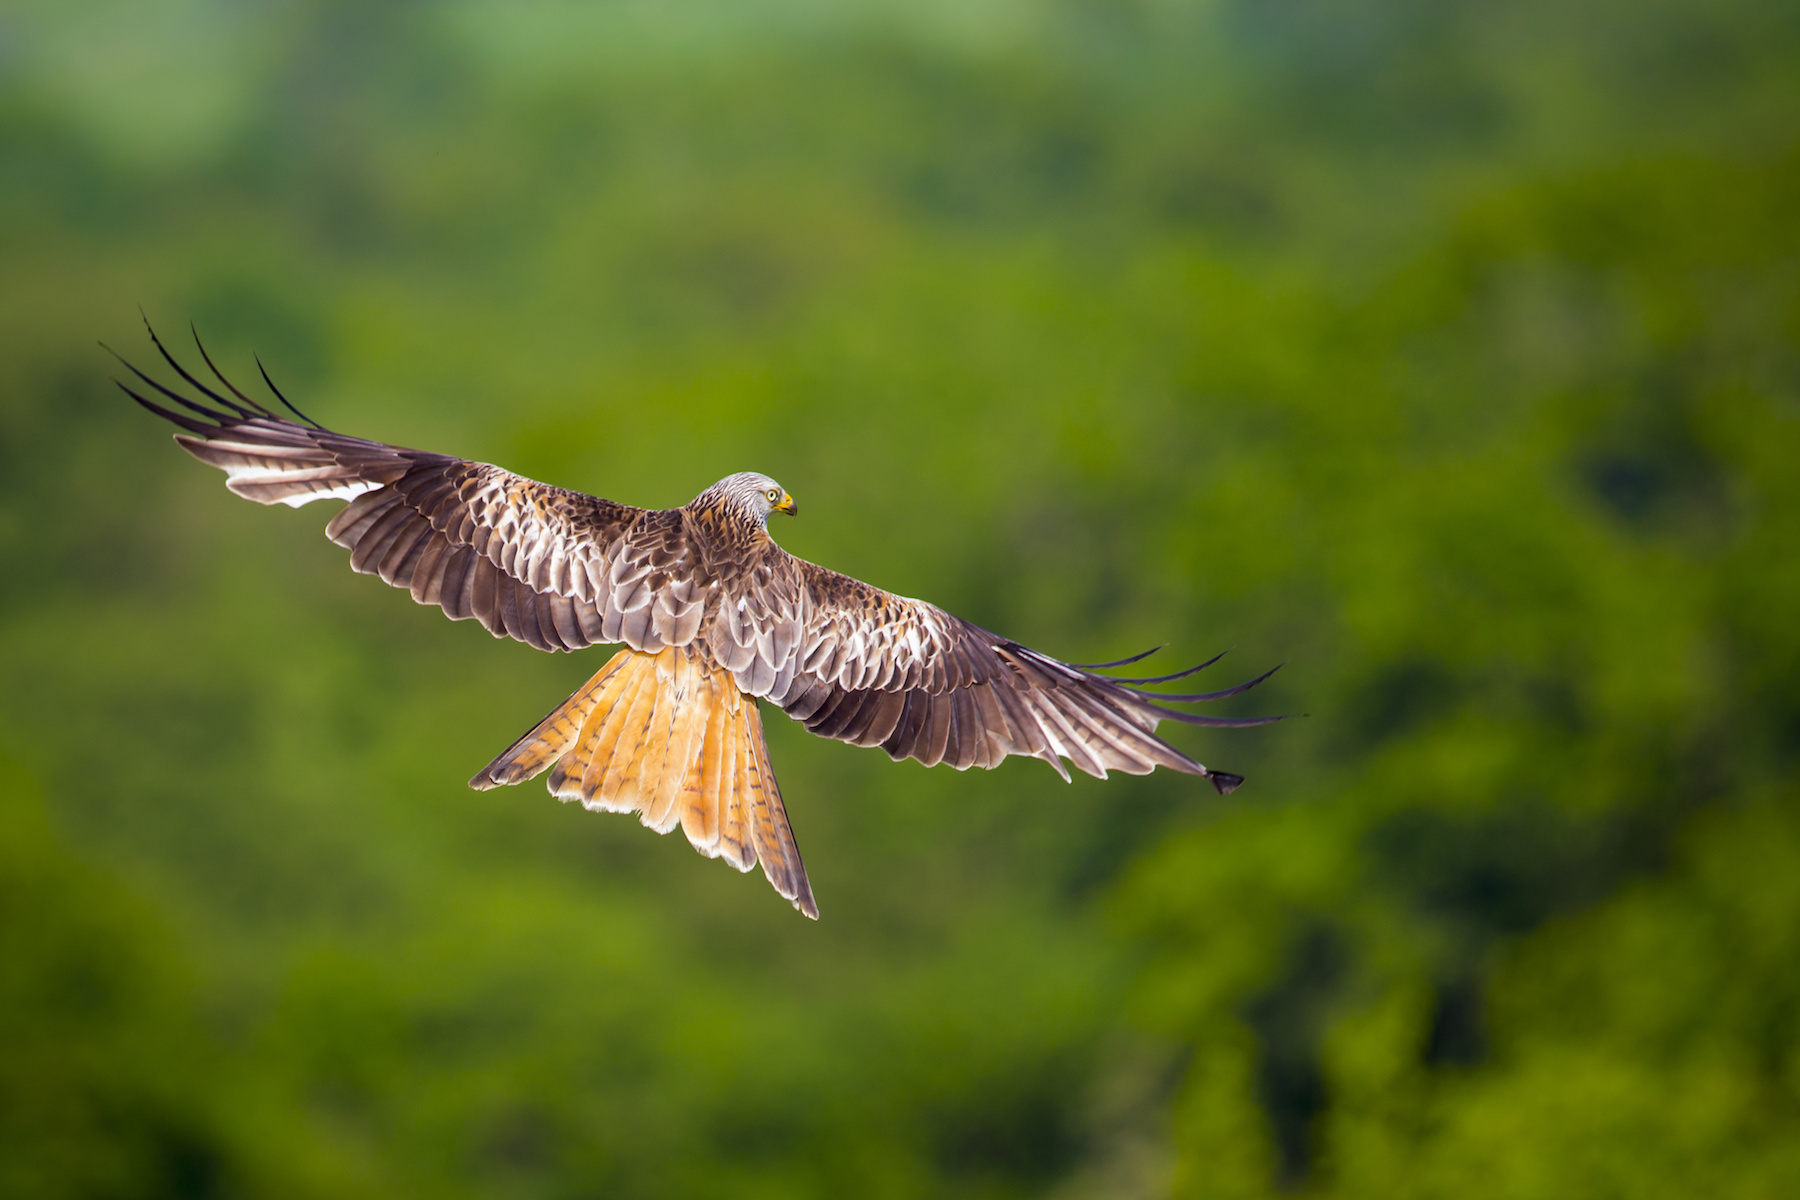 Dolcoed Red Kite Naturist Site Carmarthenshire West Wales